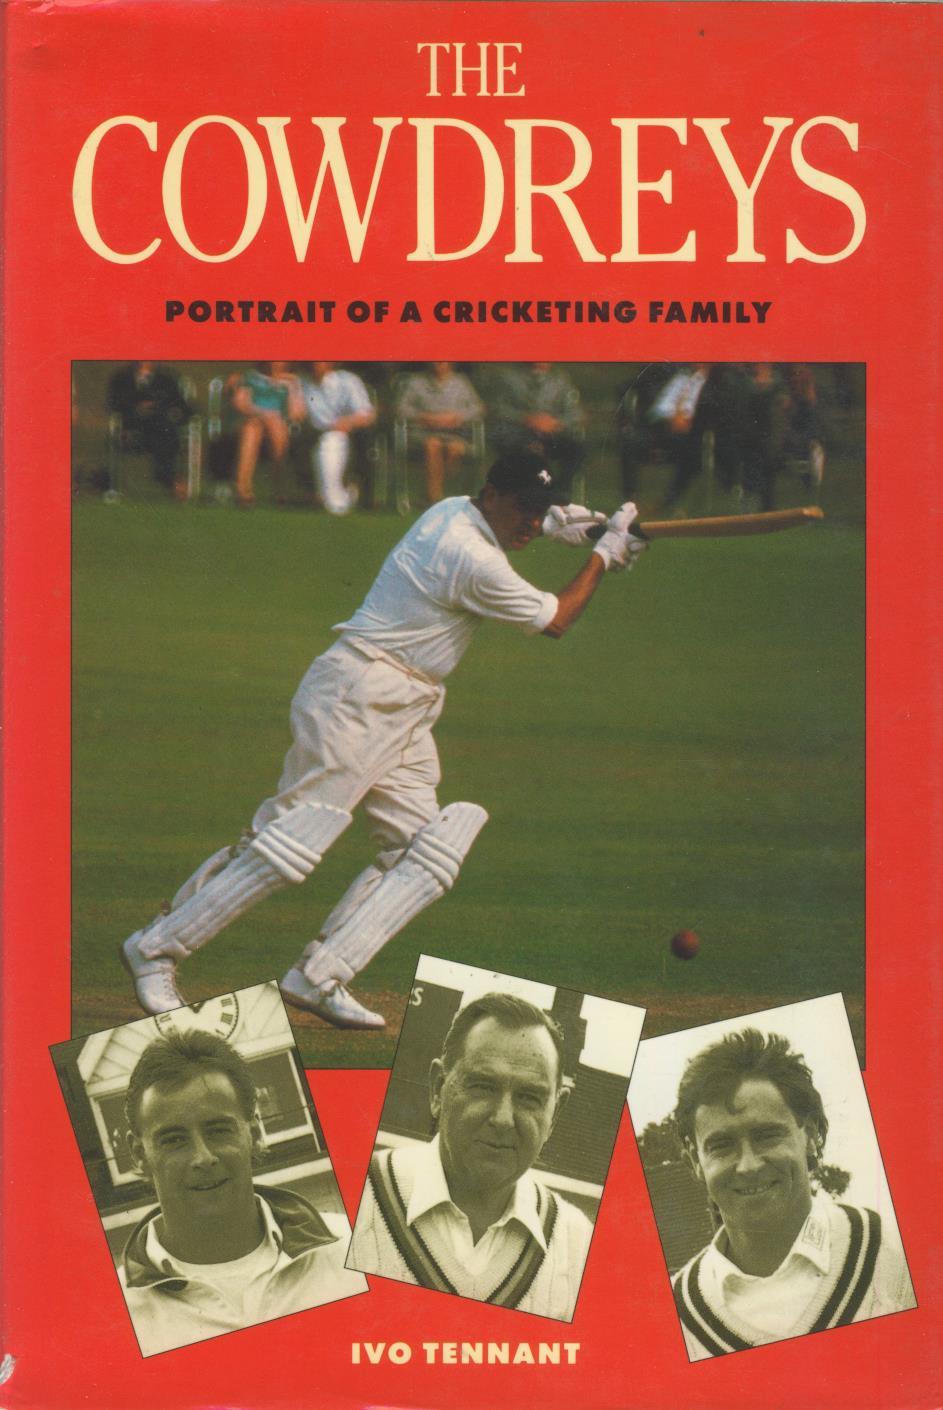 THE COWDREYS: PORTRAIT OF A CRICKETING FAMILY - Cricket Biography ...